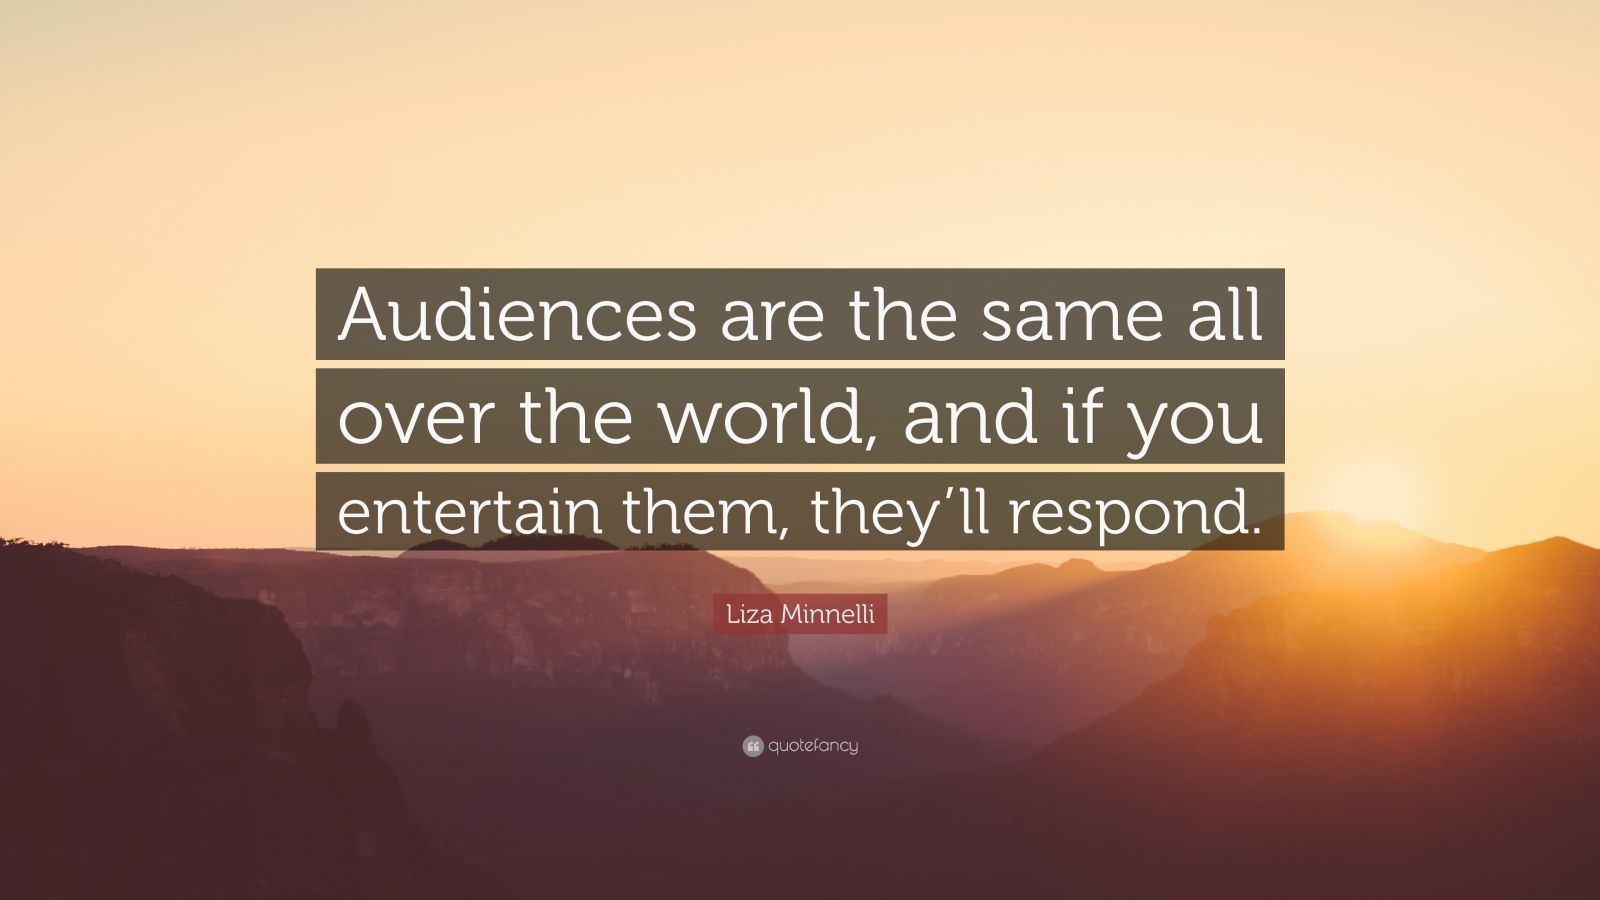 Liza Minnelli Quote: “Audiences are the same all over the world, and if ...